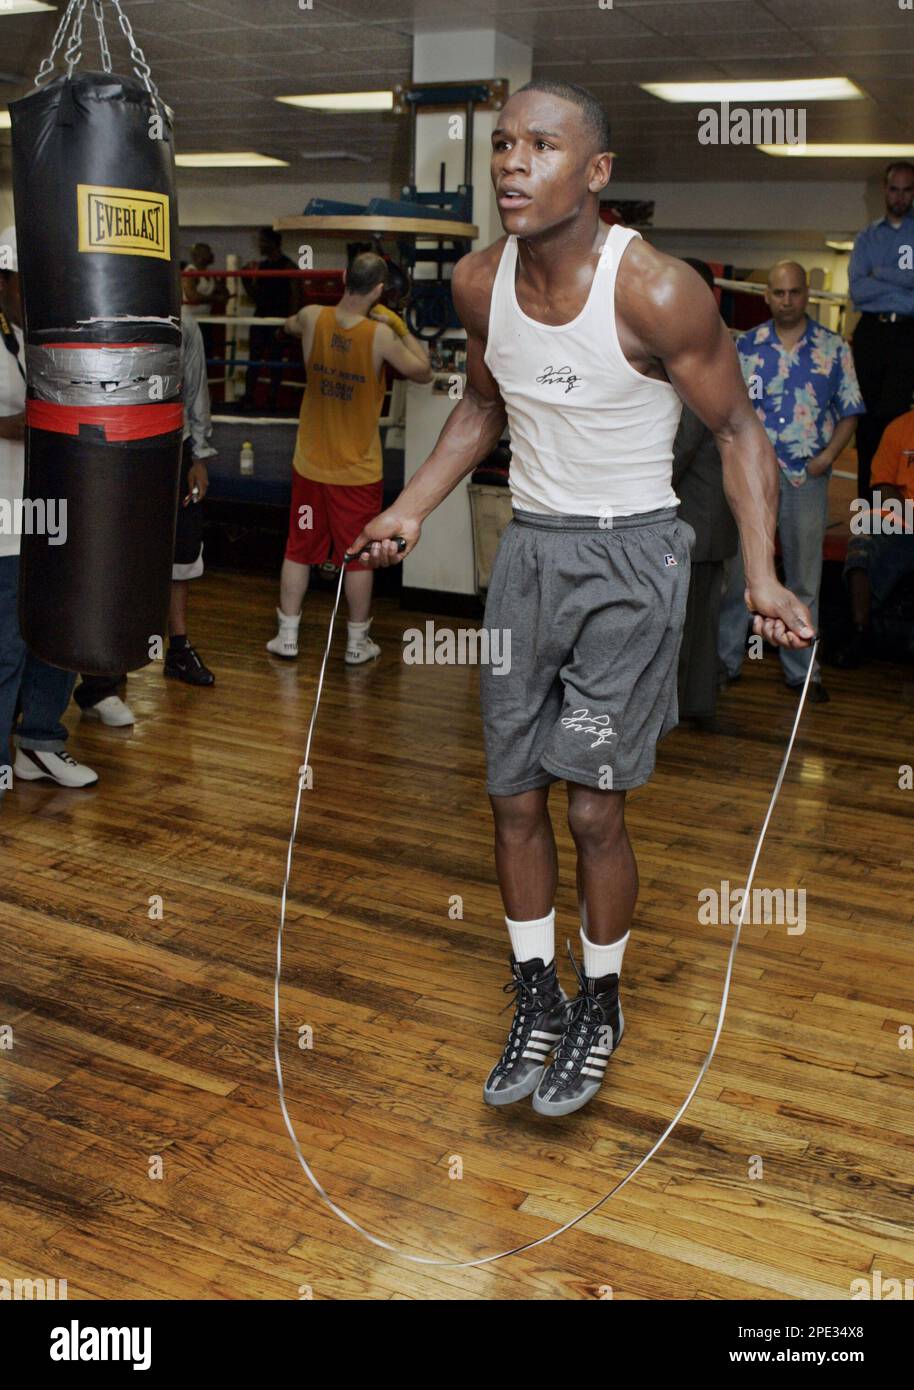 WBC #1 ranked contender Floyd Mayweather jumps rope during a workout at New  York's Kingsway Gym, Tuesday June 21, 2005. Mayweather is scheduled to face  Arturo Gatti for the Super Lightweight Championship